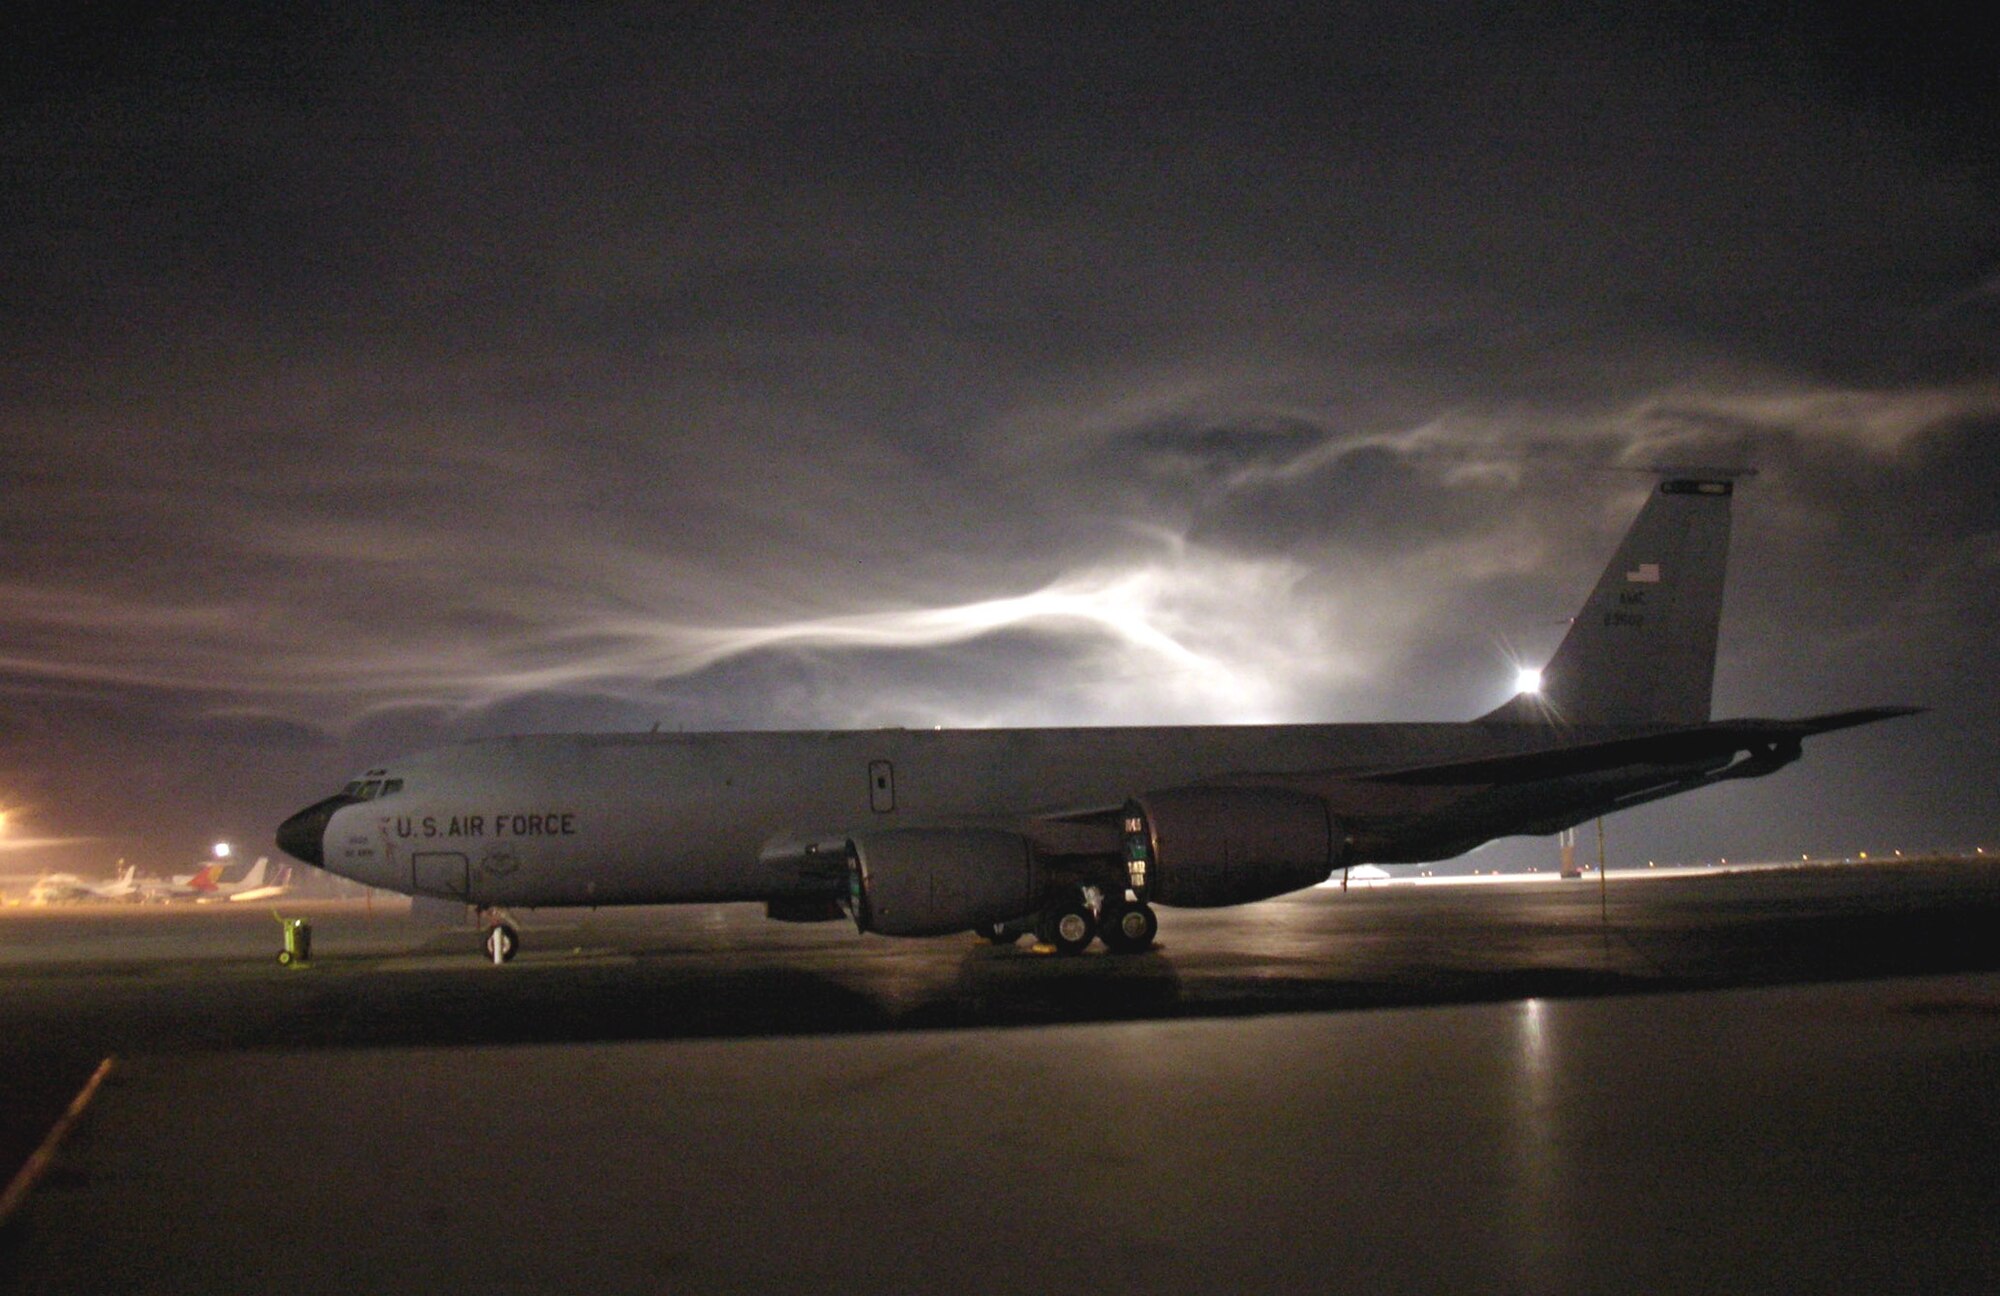 A KC-135 Stratotanker sits on the flightline at Manas Air Base, Kyrgyzstan, Thursday, Feb. 23, 2006. Ground crews will have to de-ice the tanker before it can take off on a refueling mission. (U.S. Air Force photo/Staff Sgt. Paul Clifford)

 

